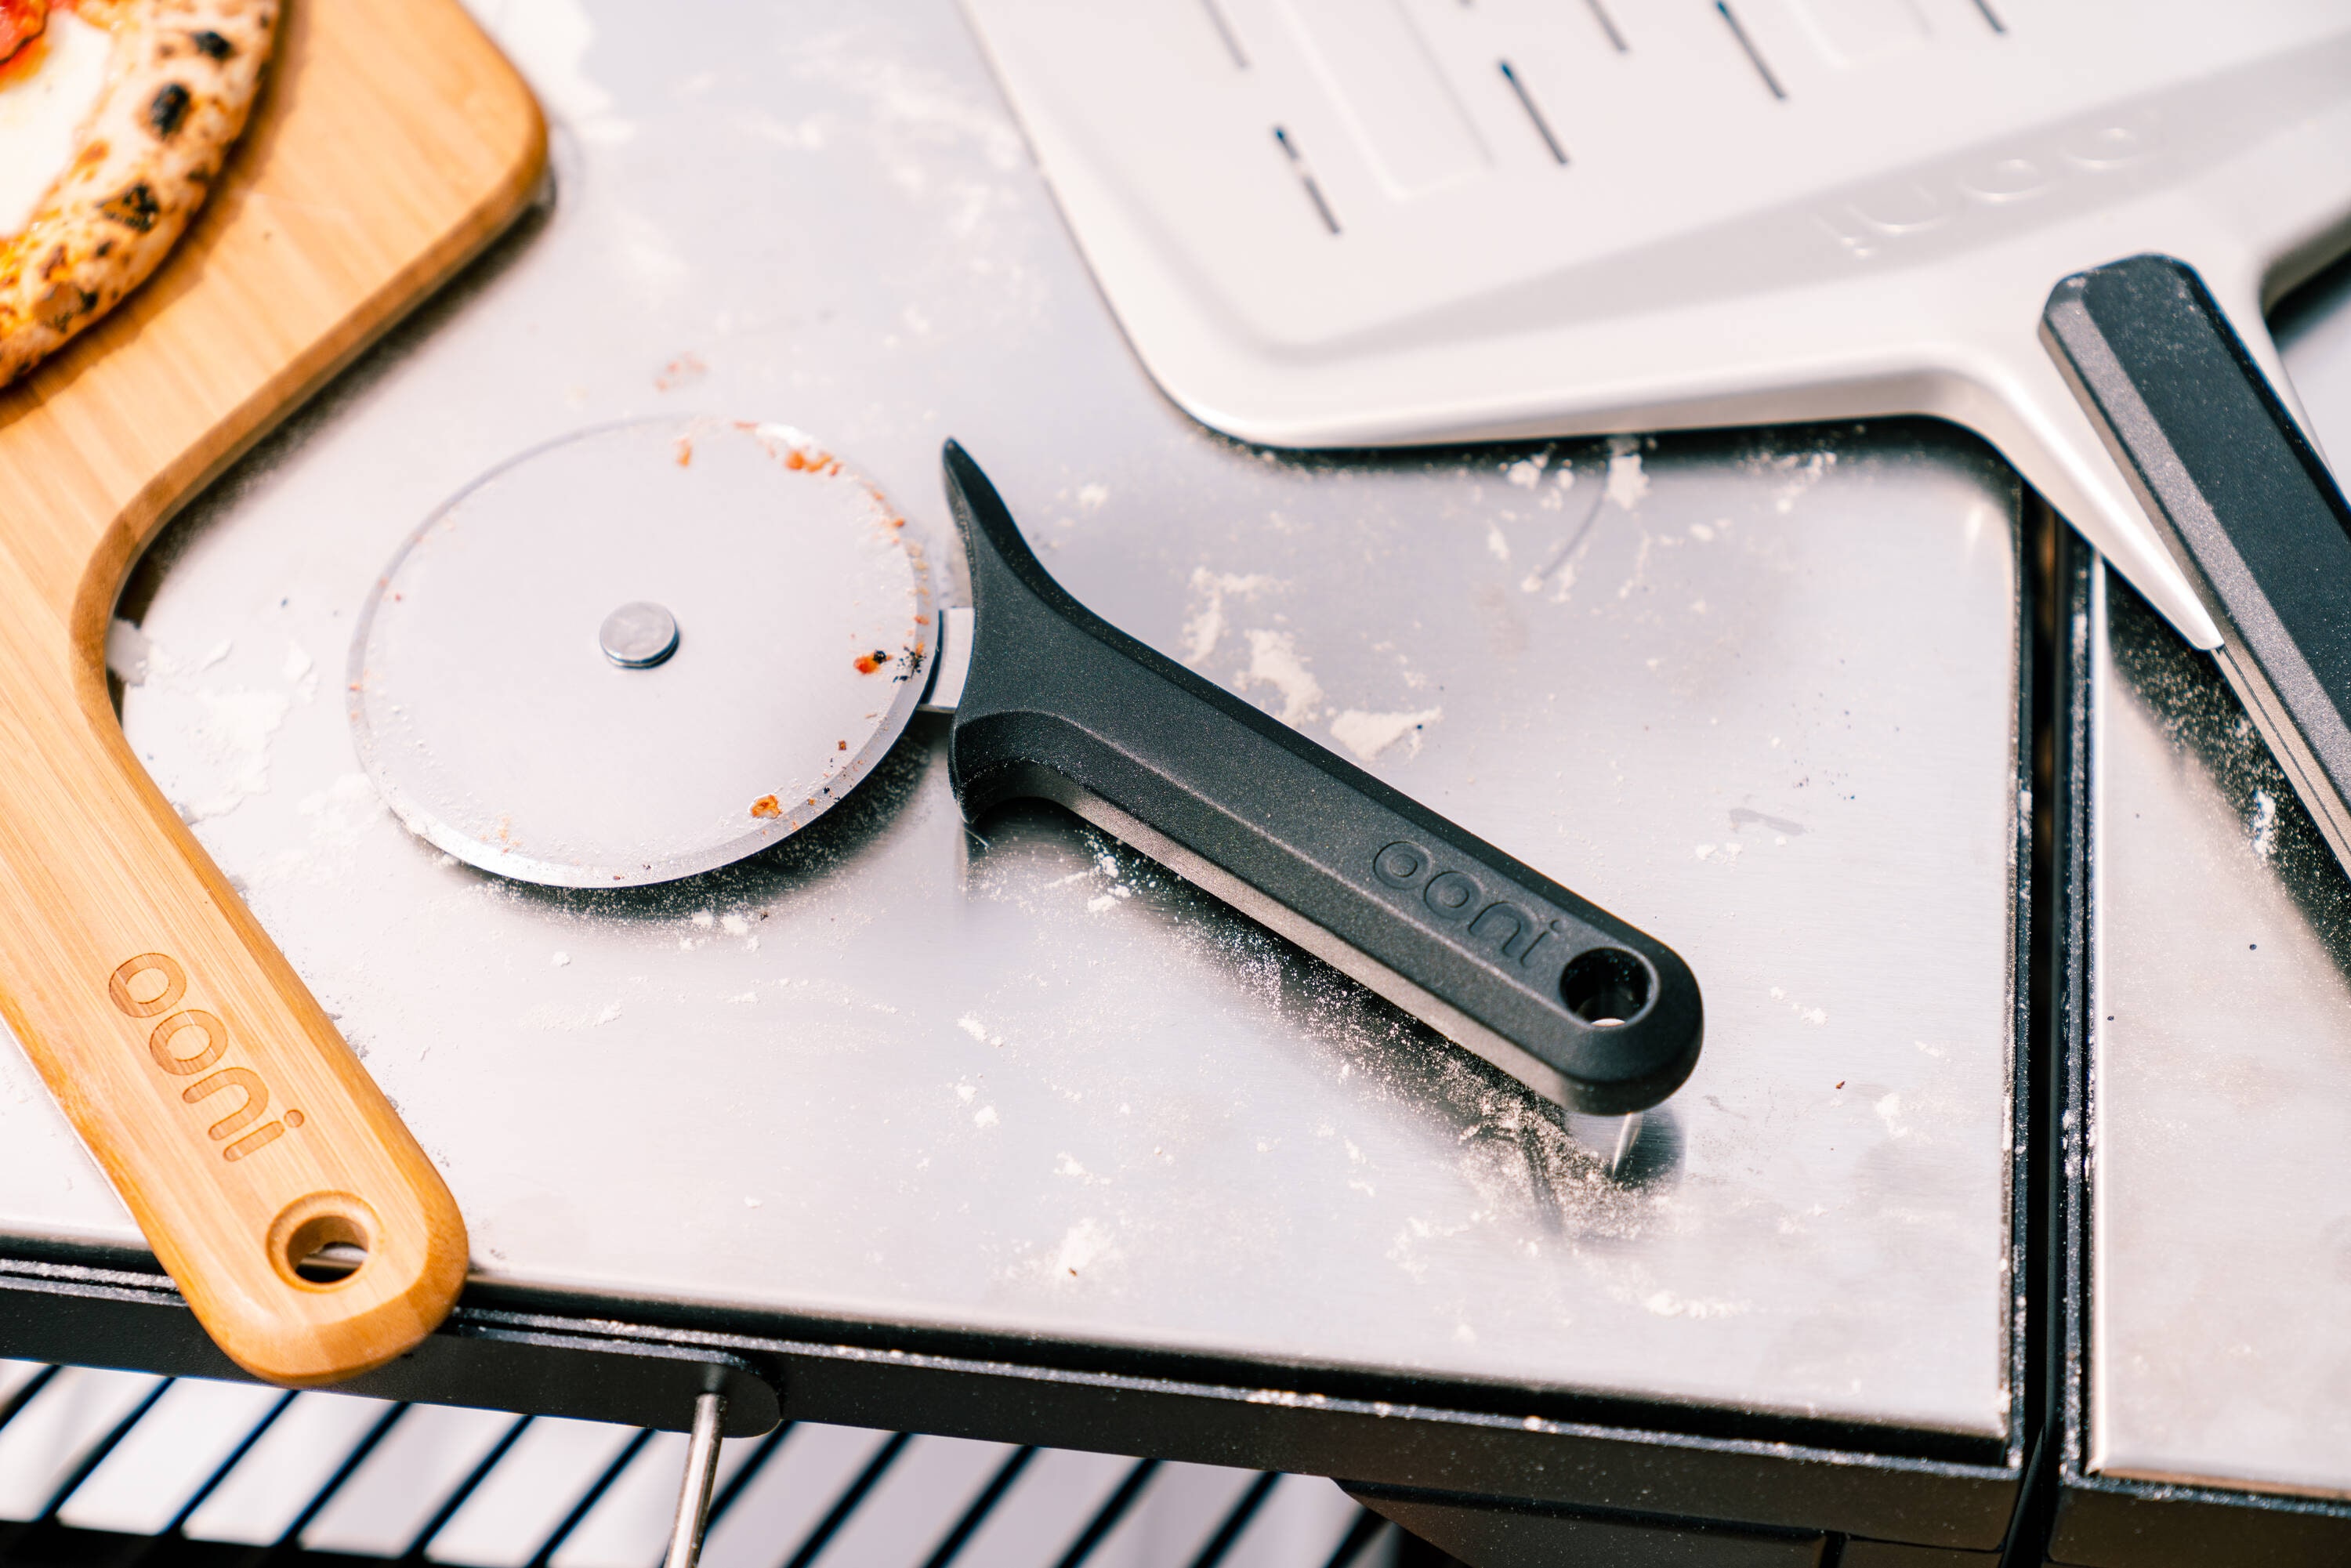 Replace Your Pizza Cutter With This Handy Office Tool